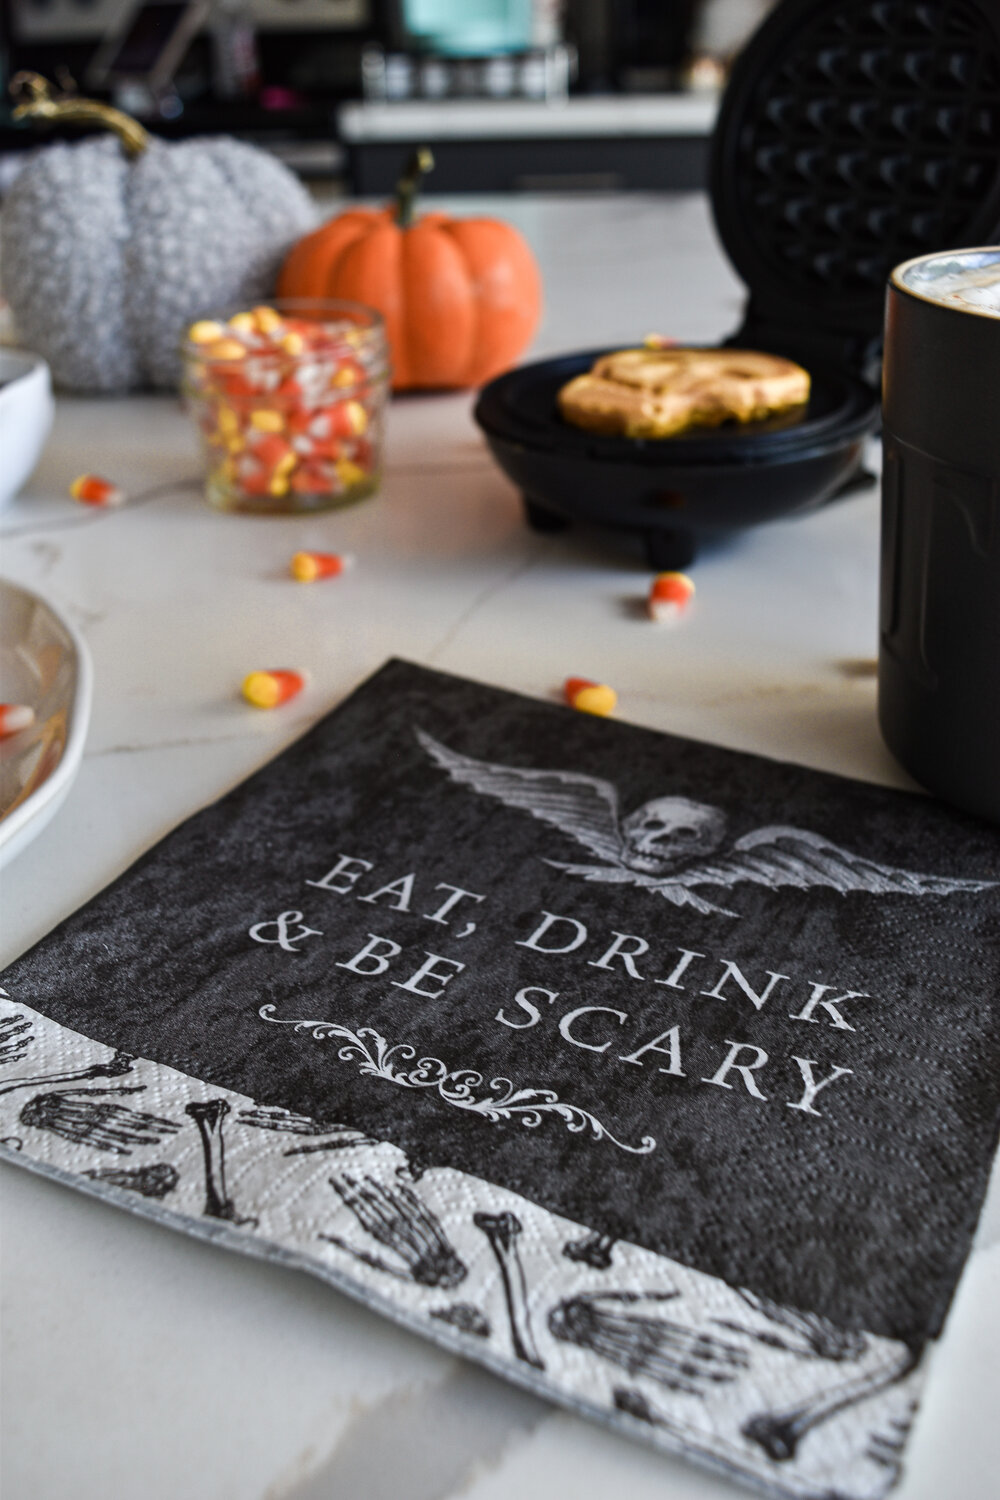 Eat, Drink * be scary text on paper